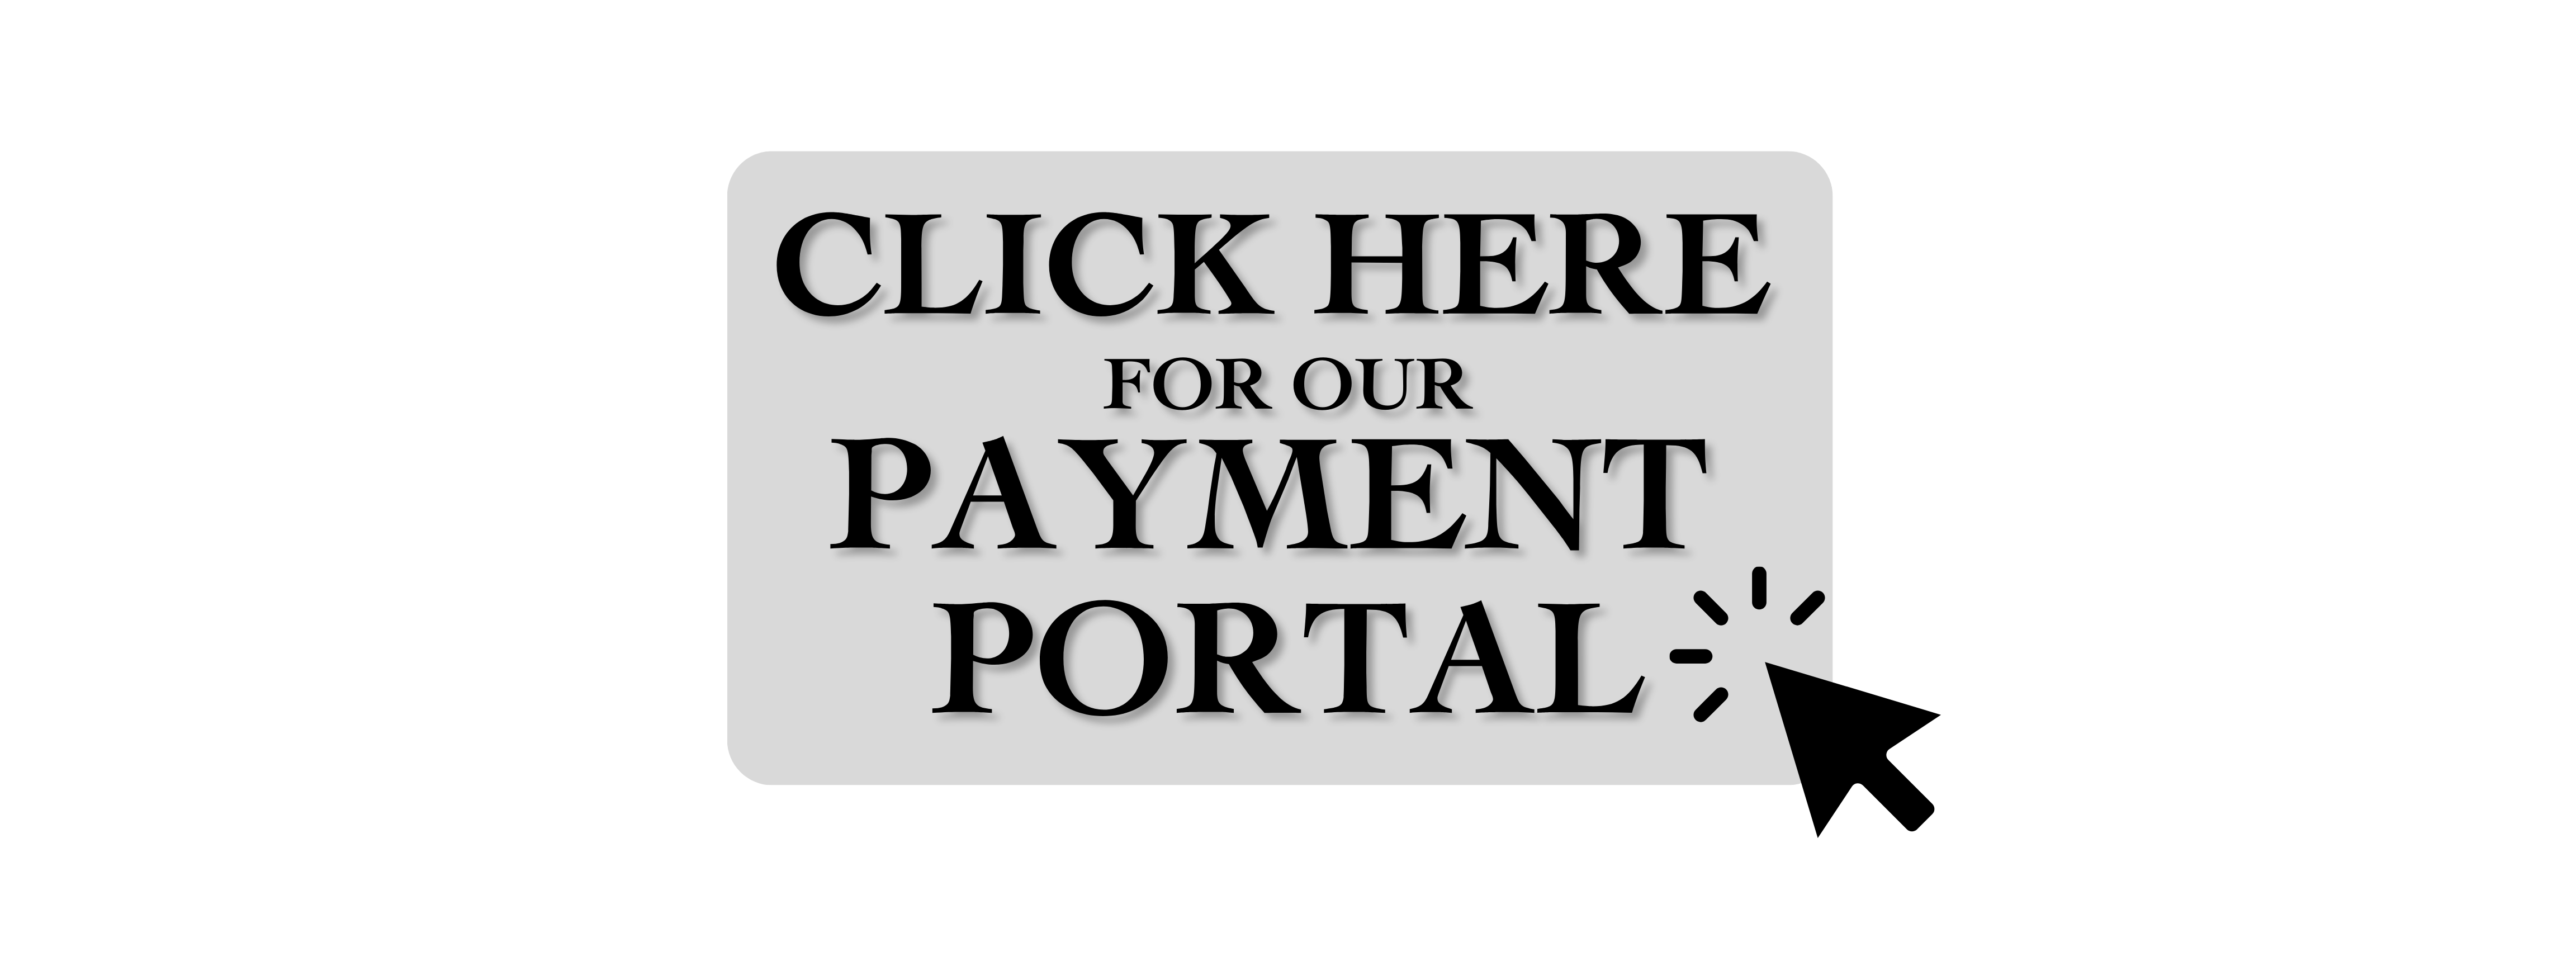 pay portal click here (2)